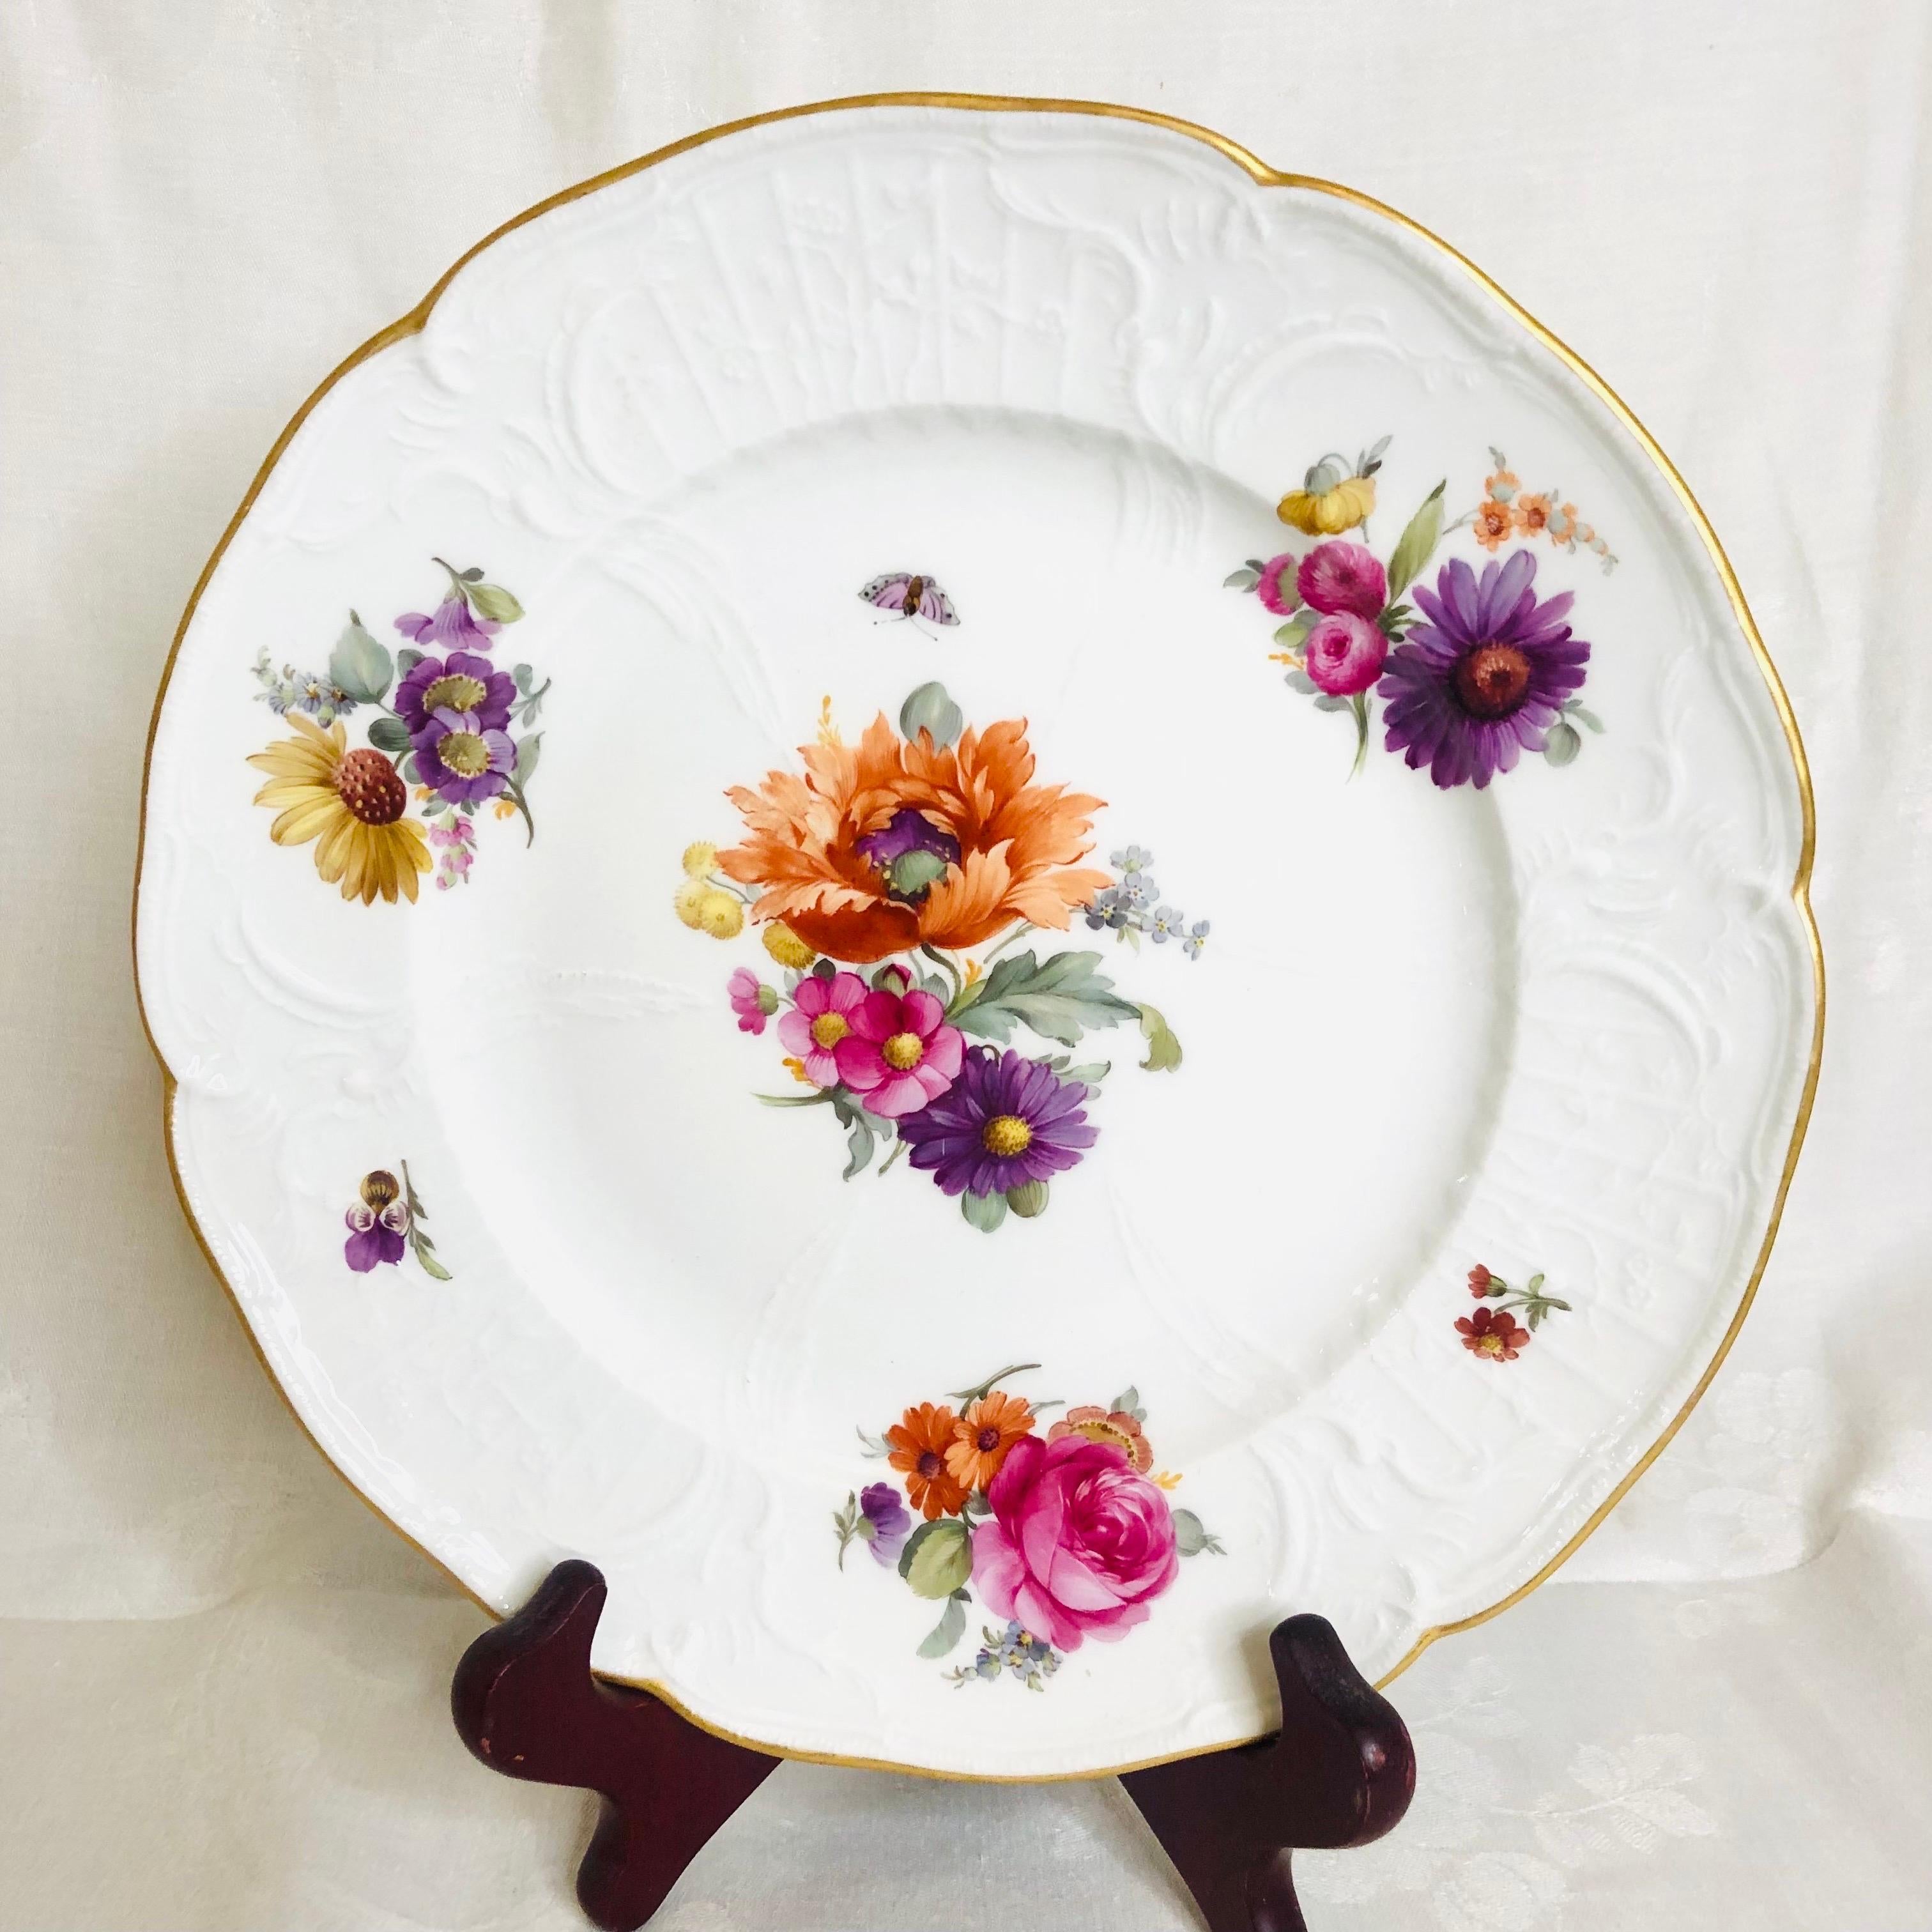 Set of 8 KPM Luncheon Plates Each Hand-Painted with a Different Flower Bouquet For Sale 3